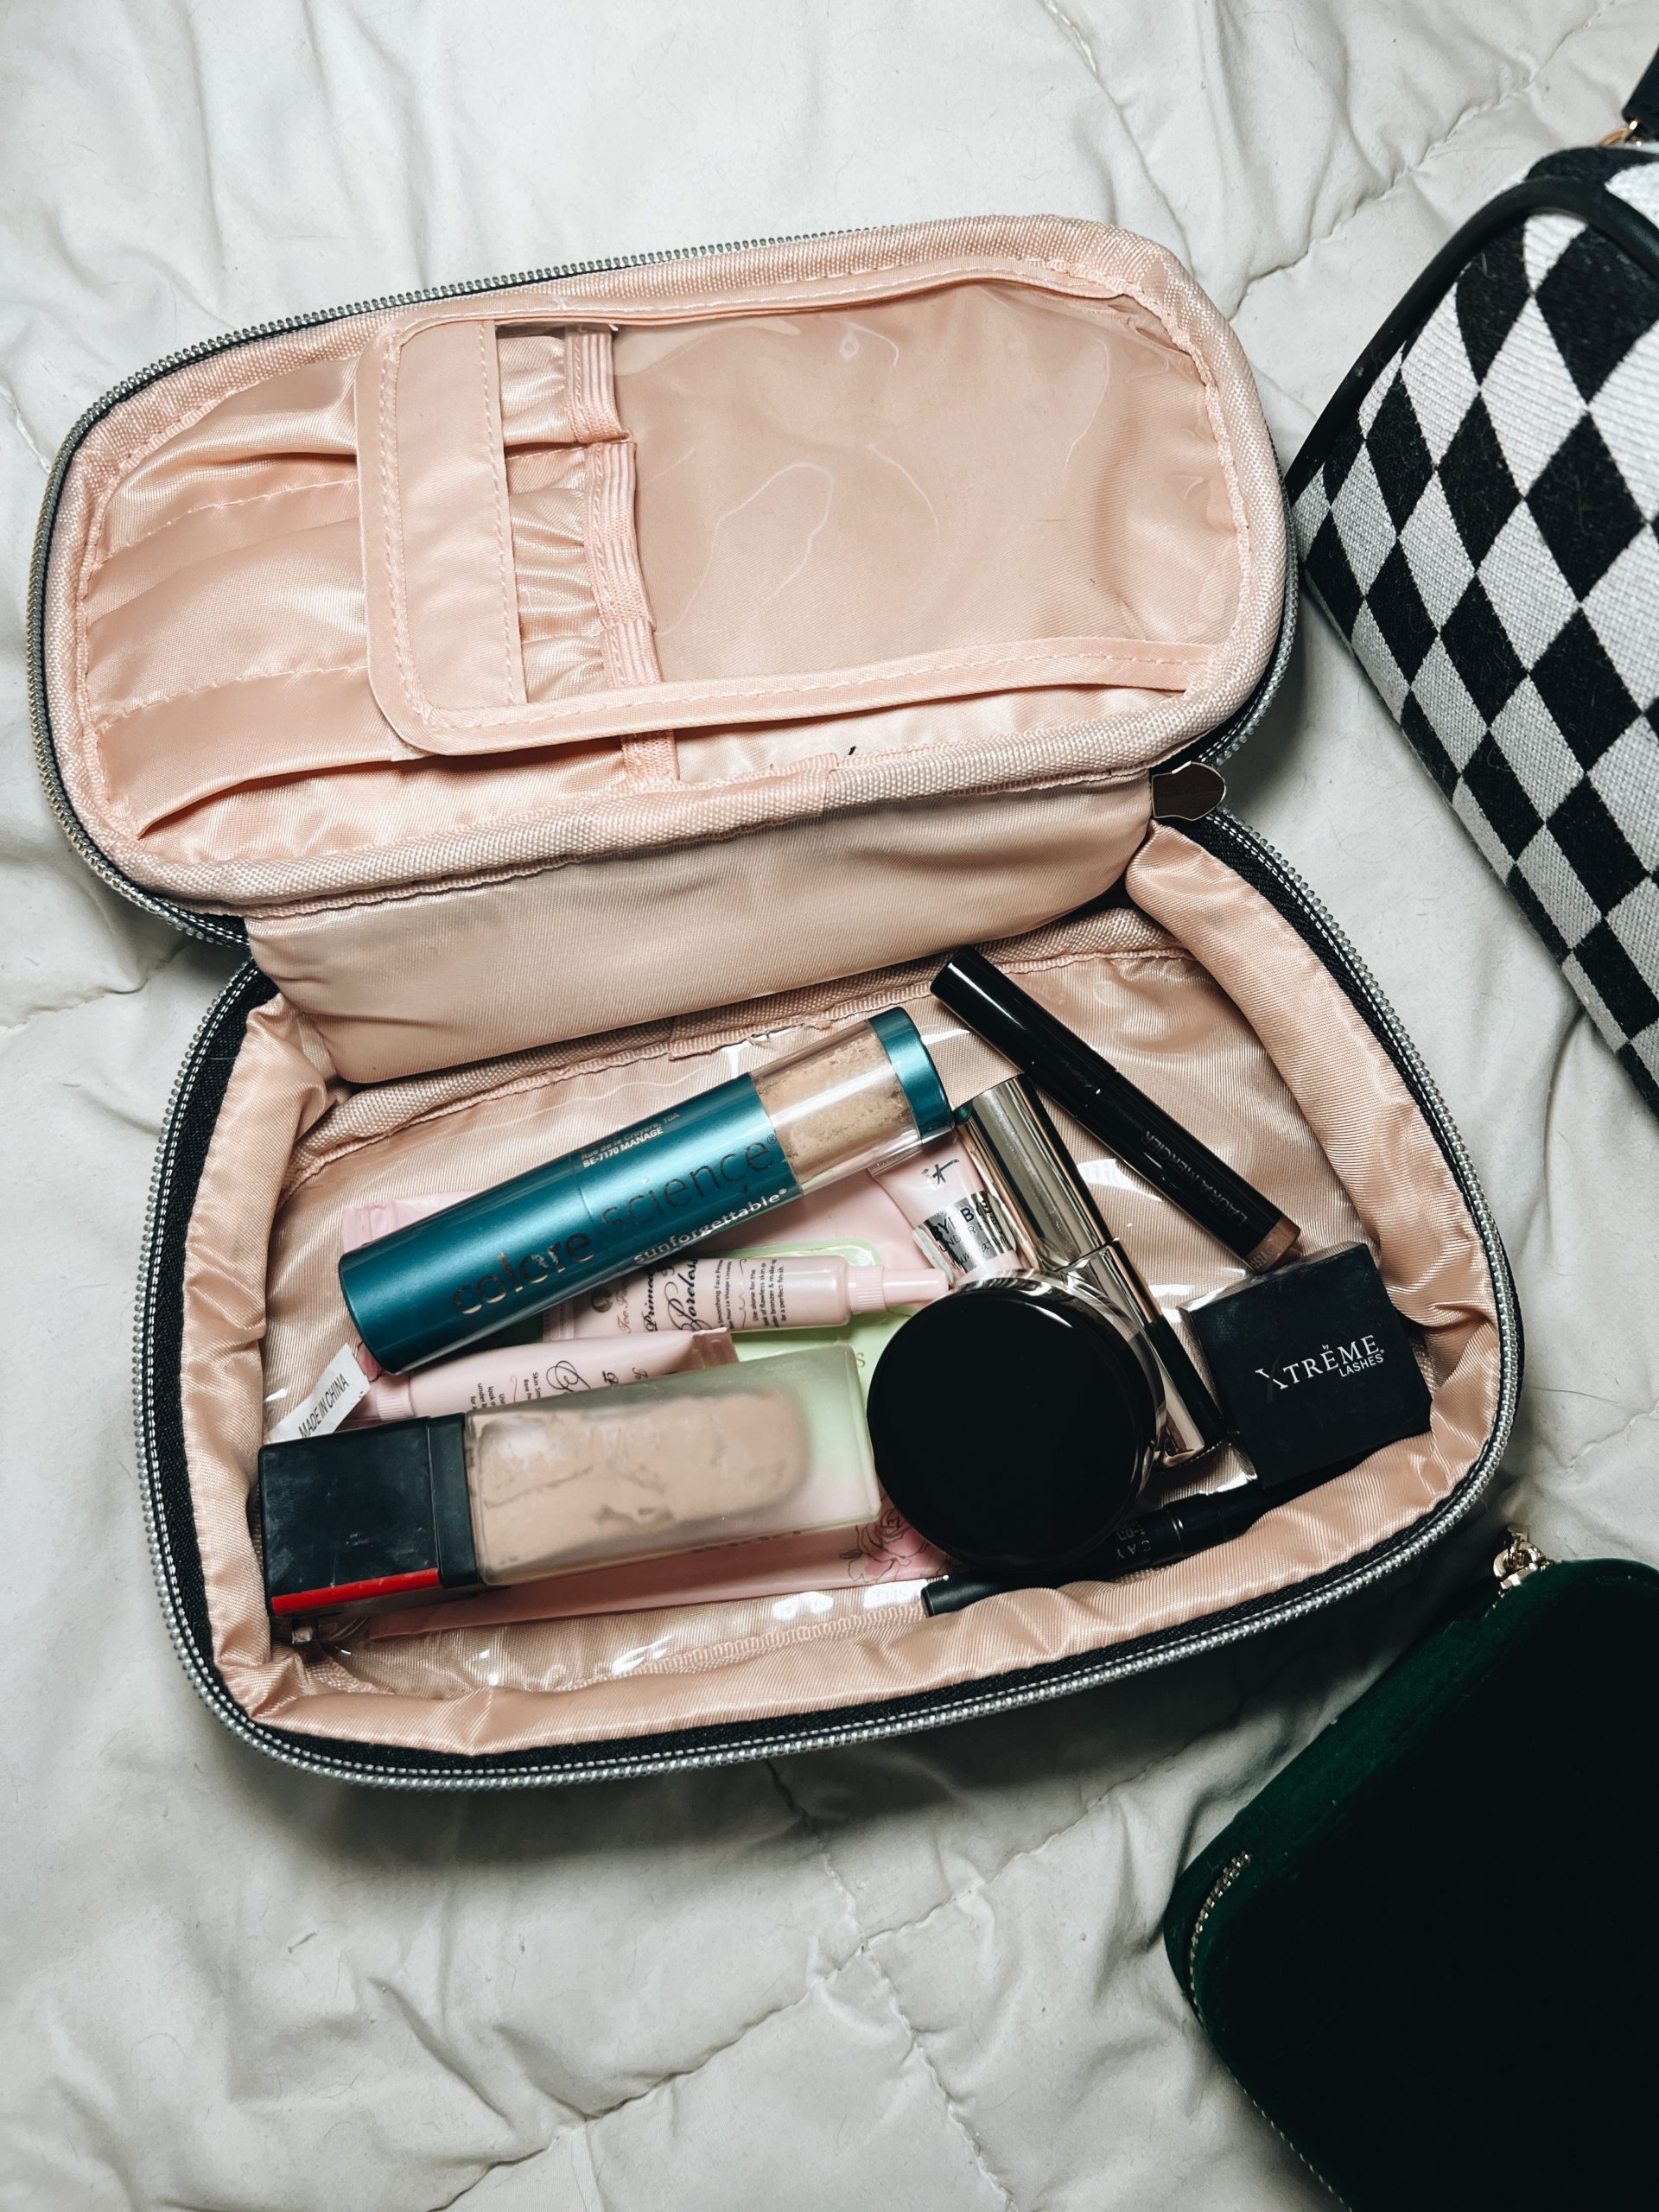 Travel Beauty Organizers for makeup